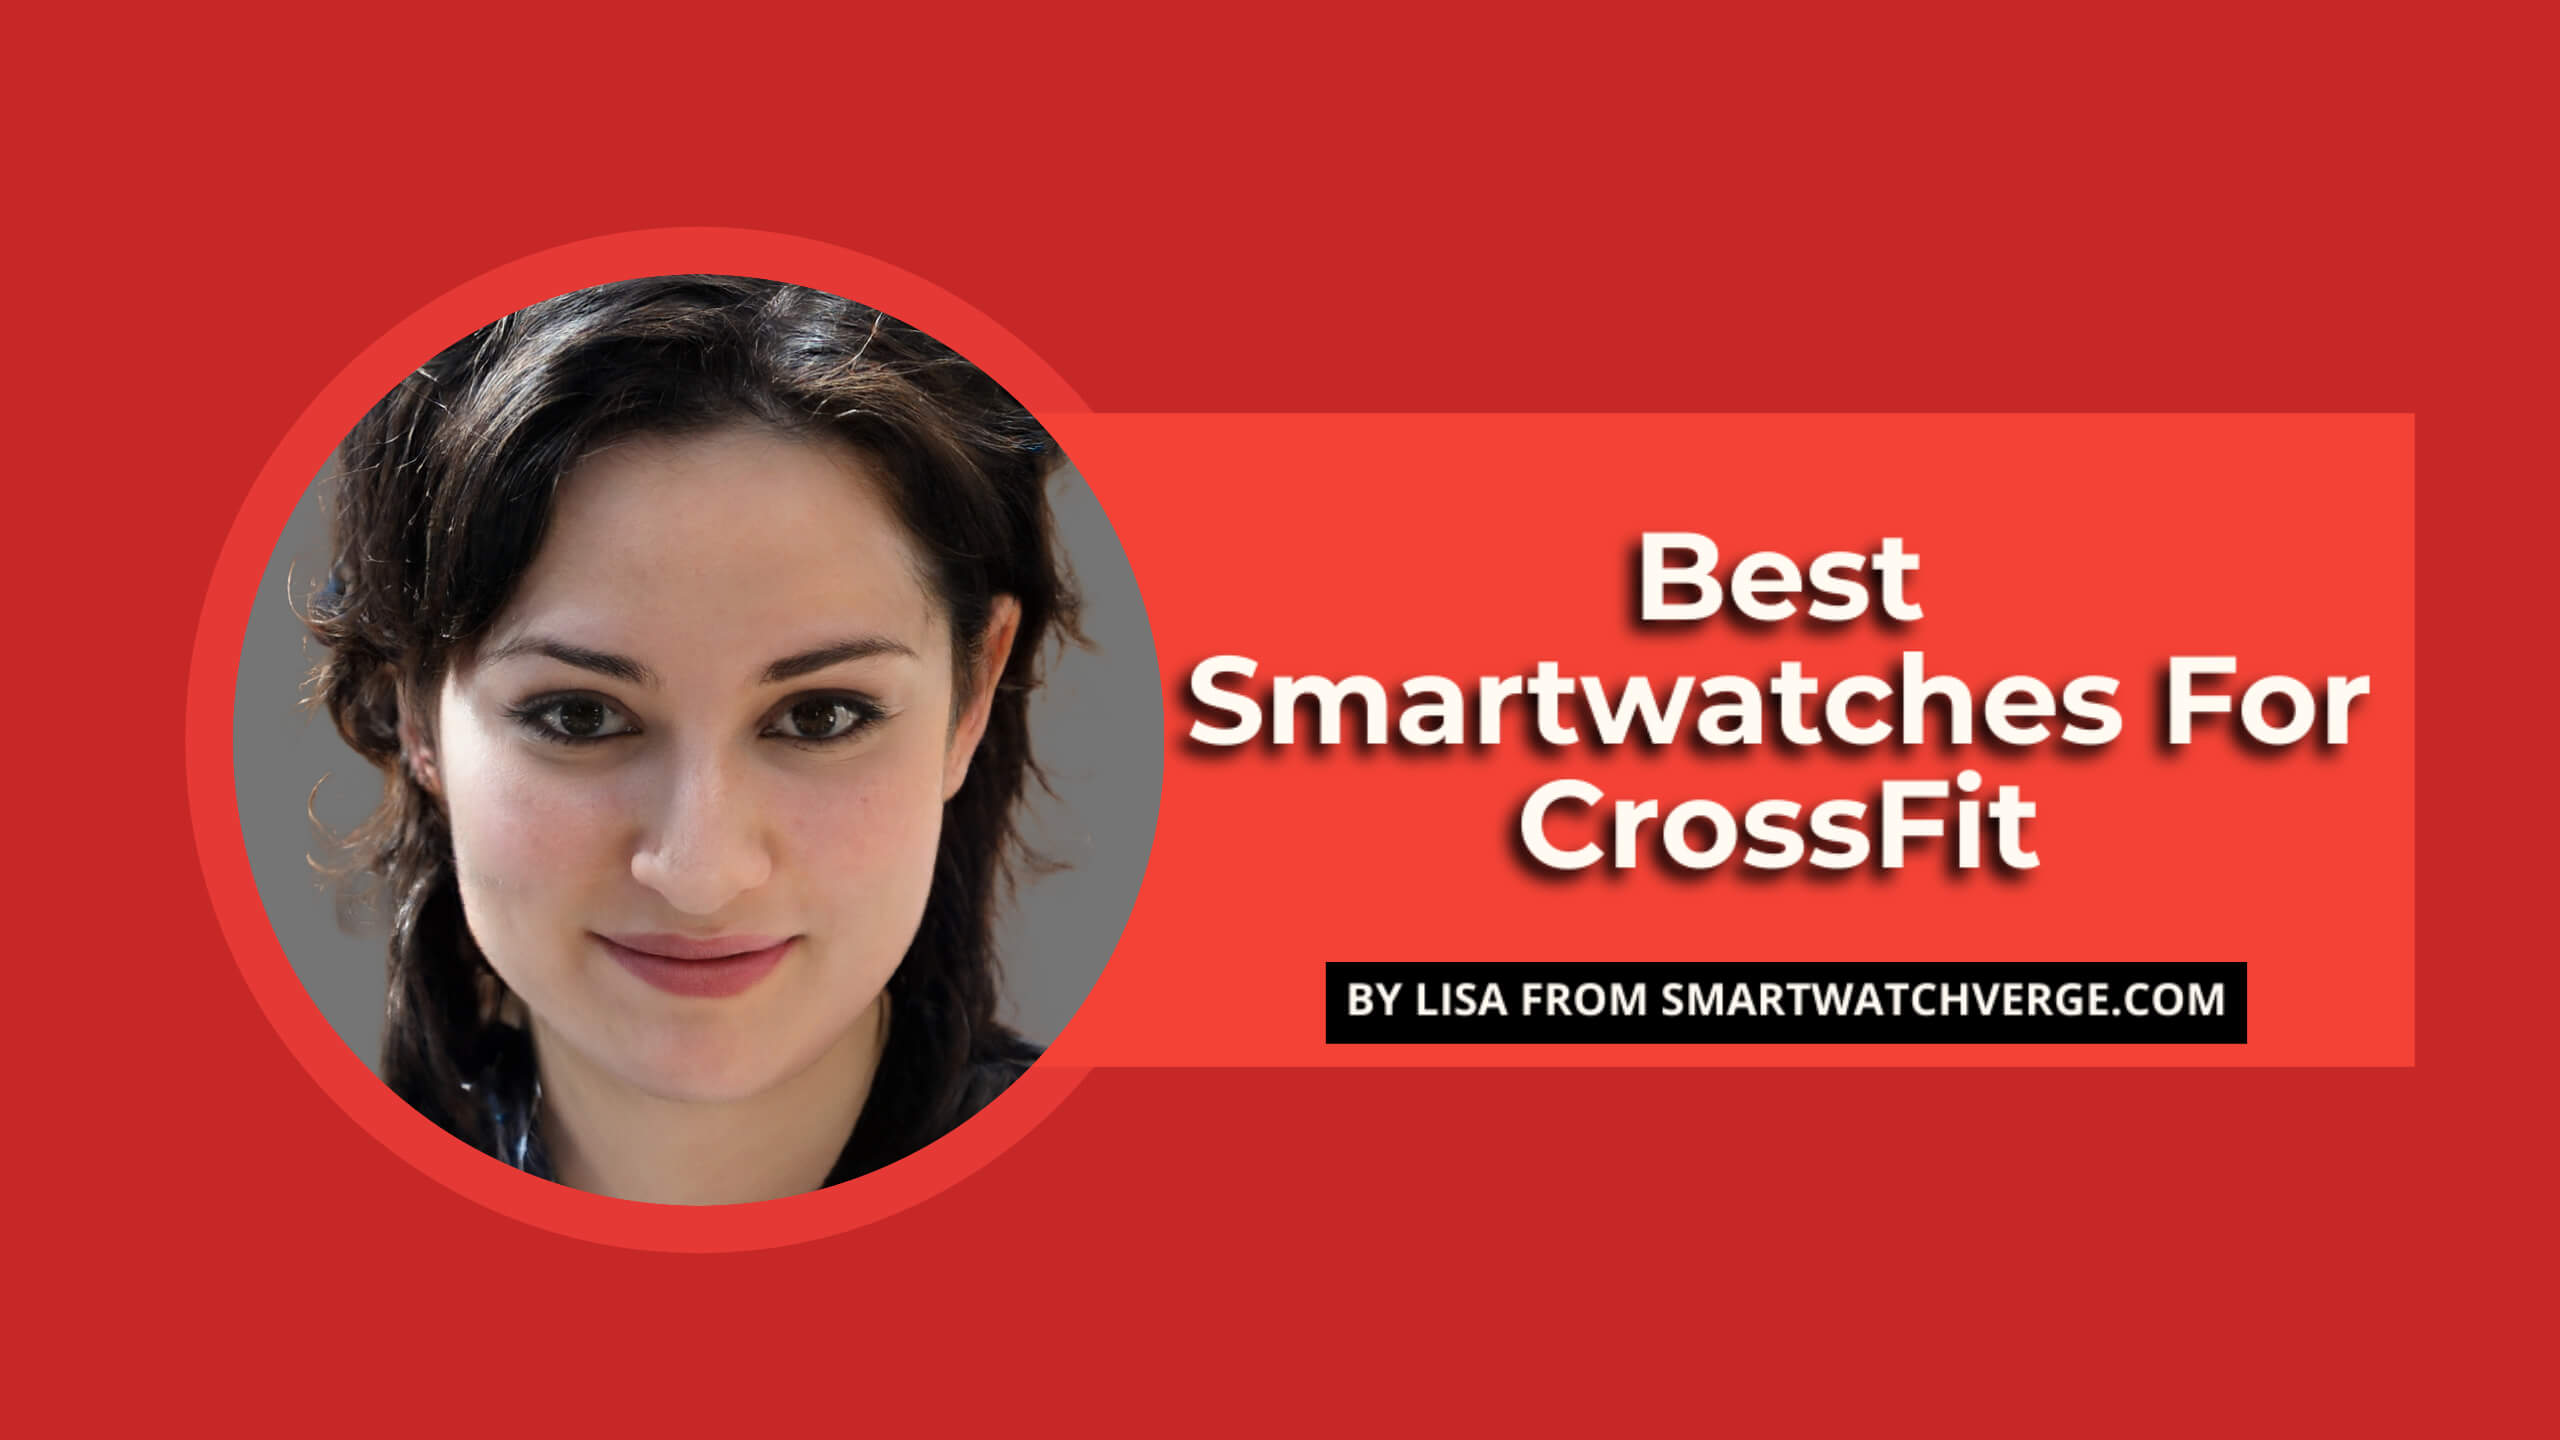 Best Smartwatches For CrossFit